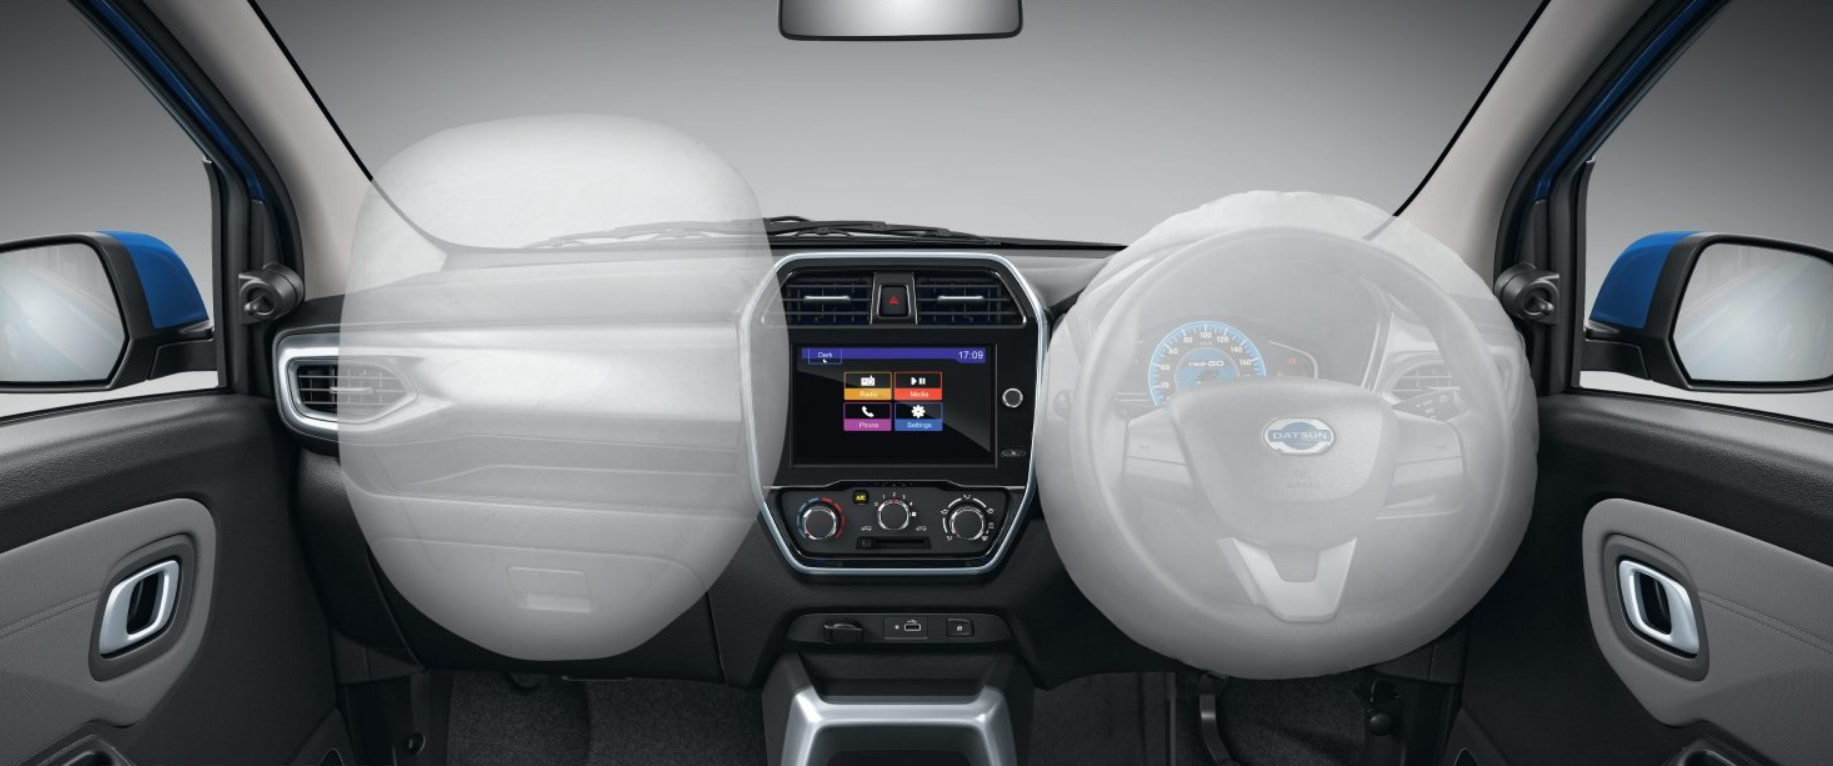 Datsun redi-Go Safety Features